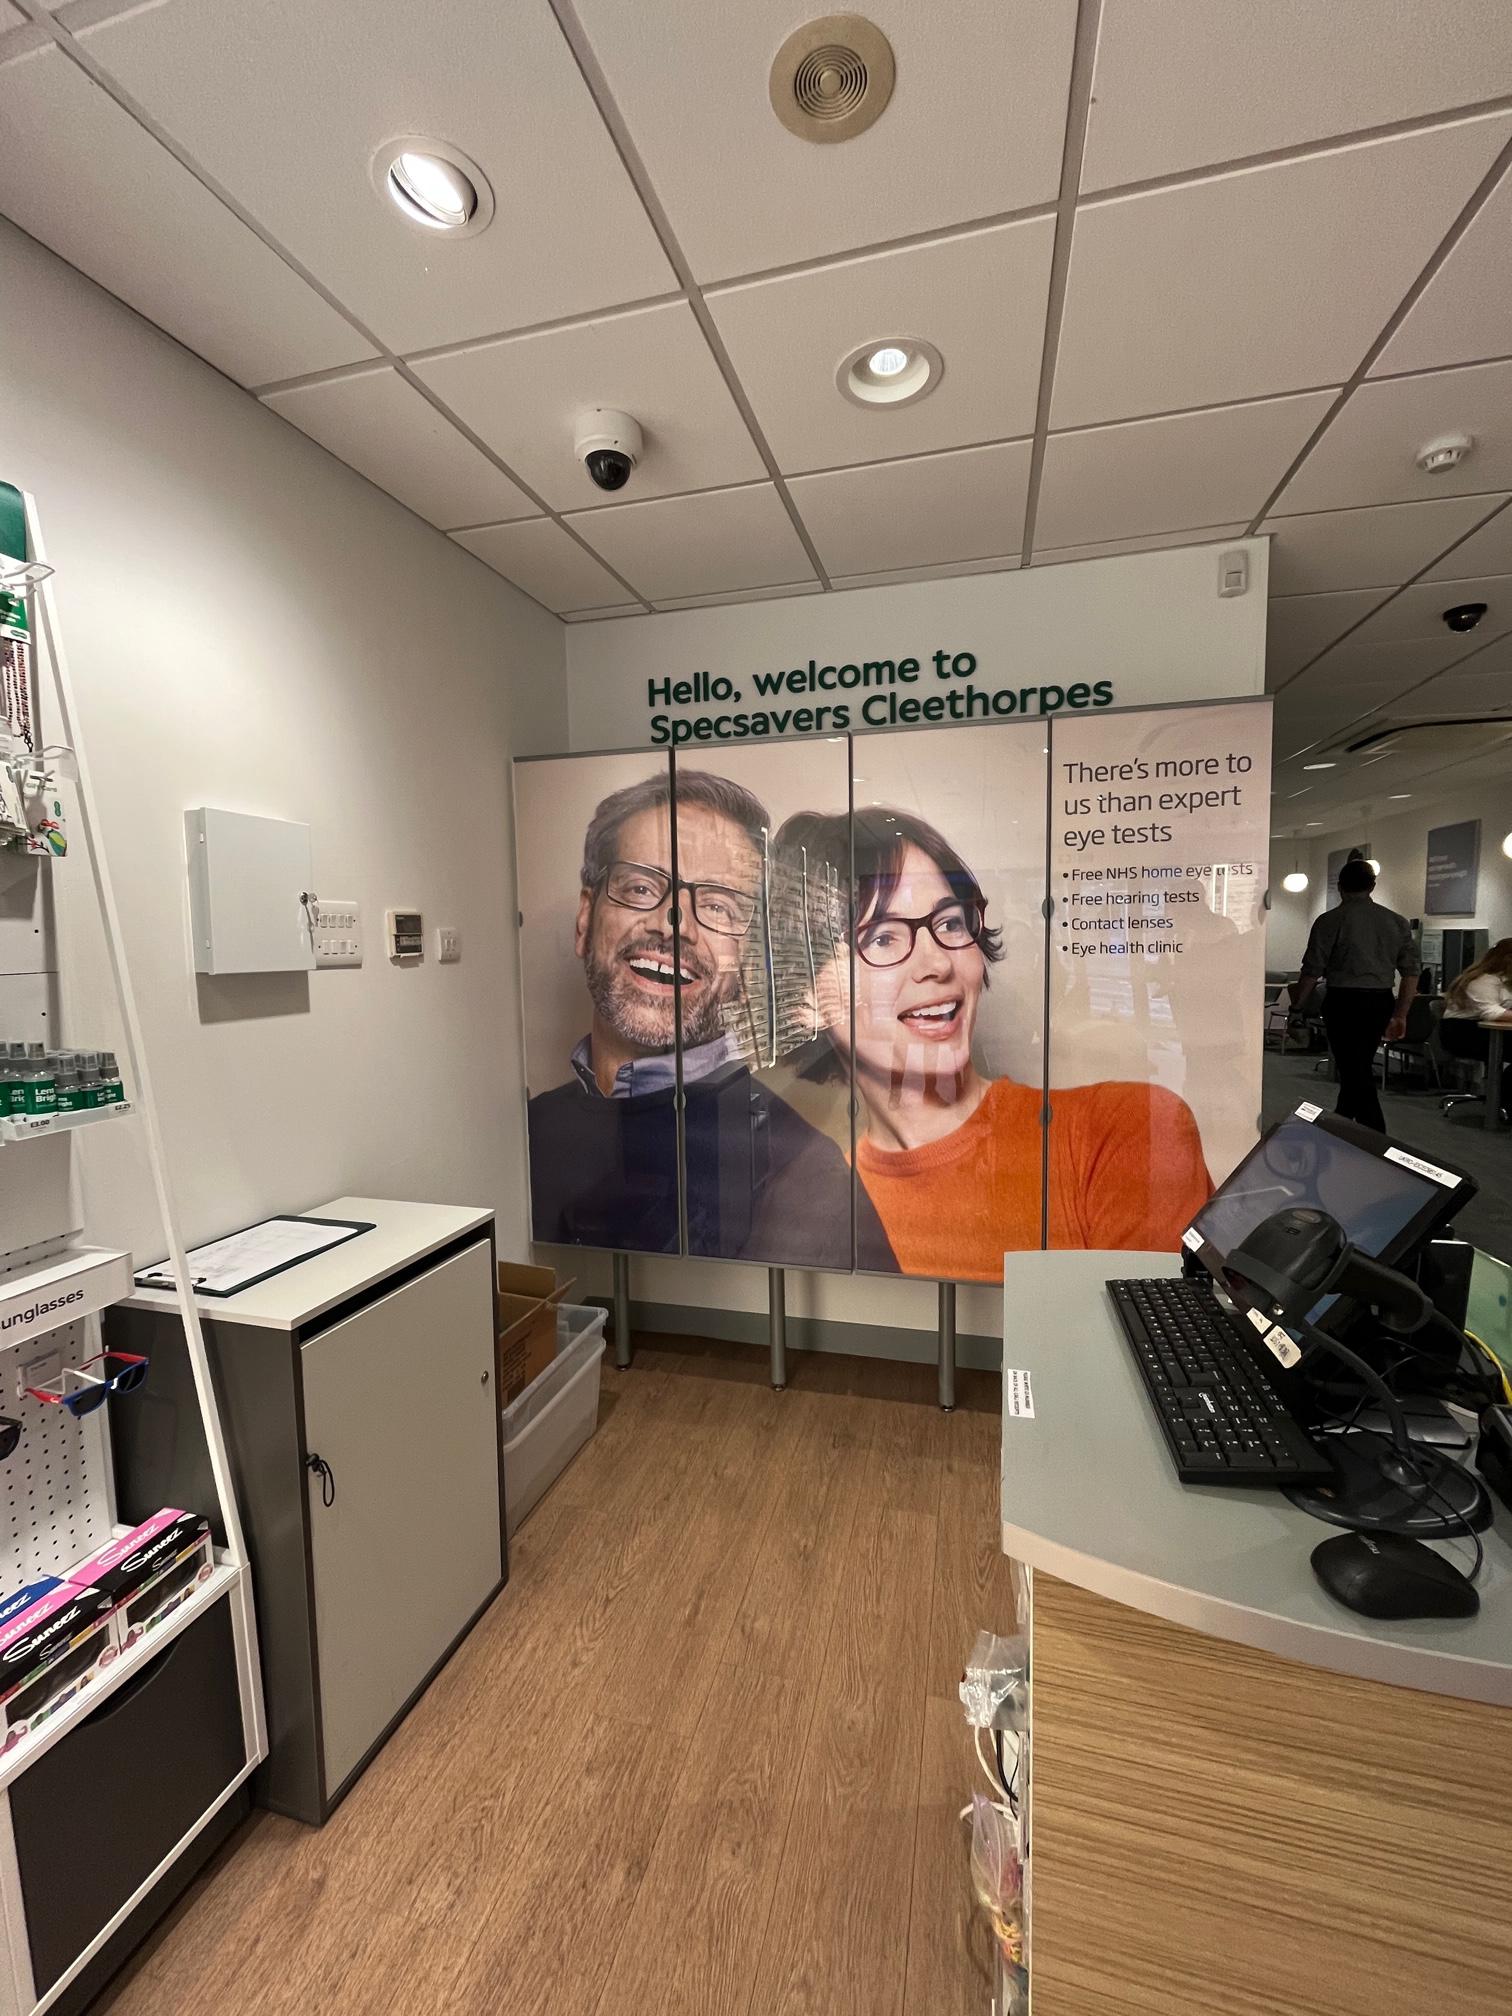 Cleethorpes Specsavers Specsavers Opticians and Audiologists - Cleethorpes Cleethorpes 01472 608840